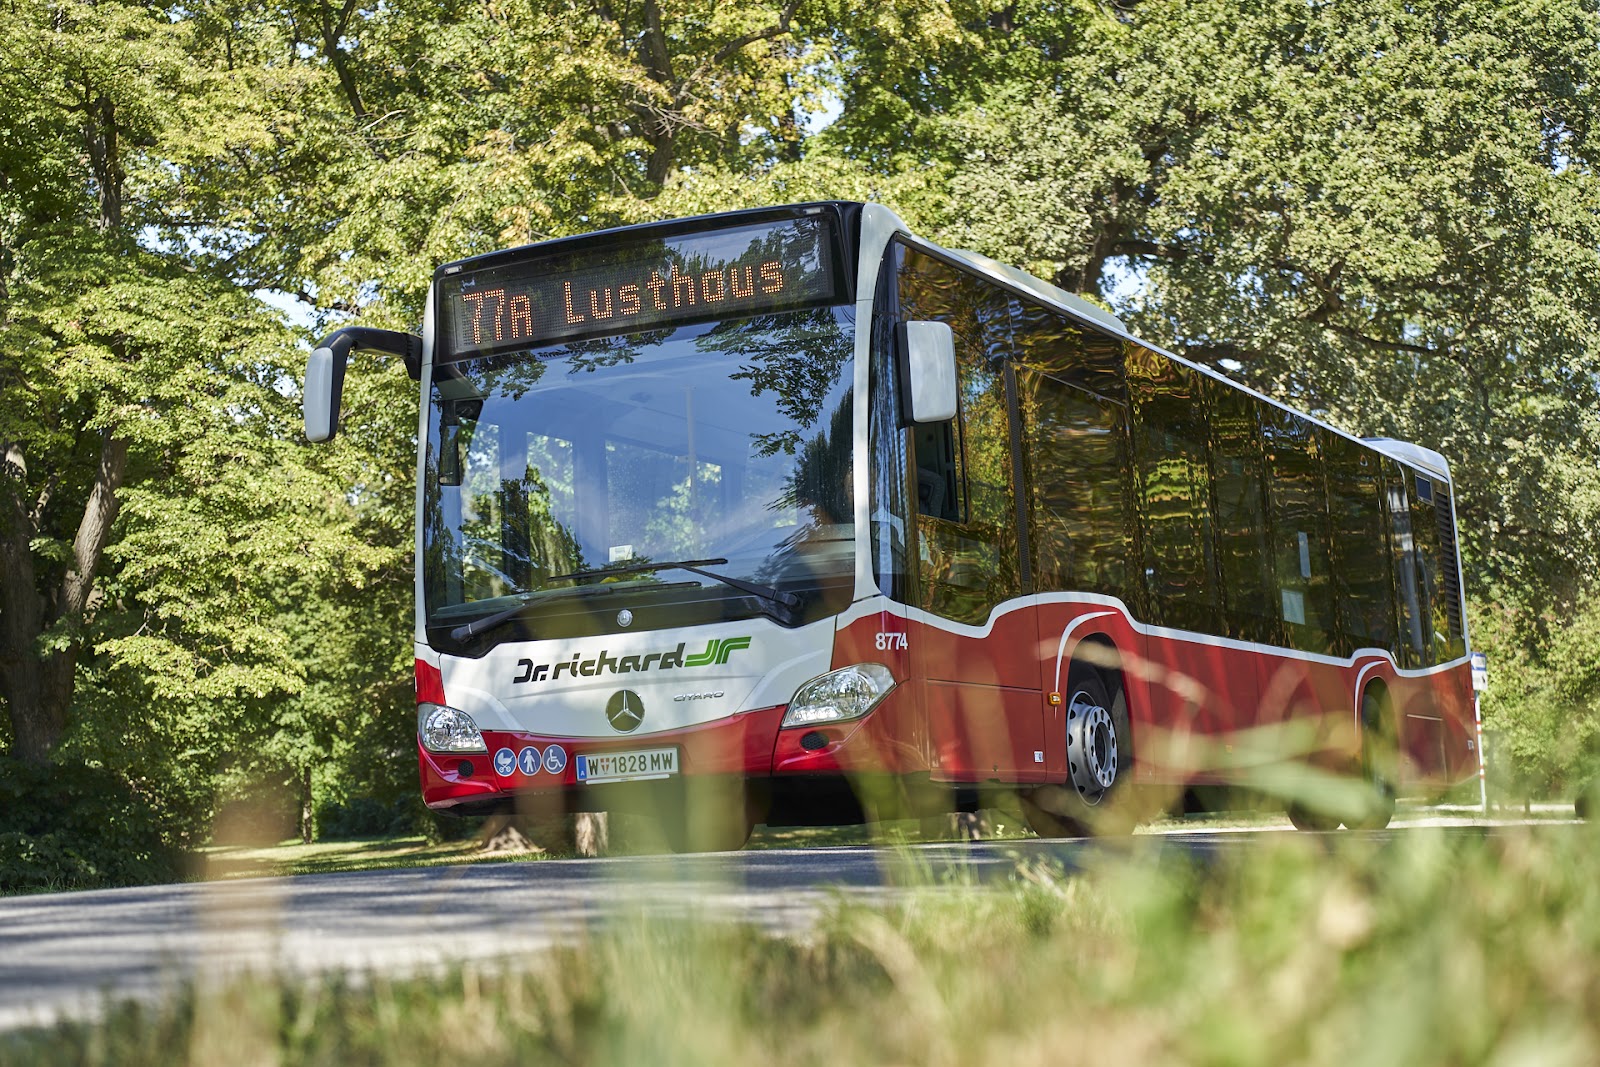 Dr. Richard is one of the biggest bus companies in Austria, serving cities across the country including Vienna, Graz, Linz, Villach, and St. Pölten.  Photo credit: Dr. Richard M. Scheer.